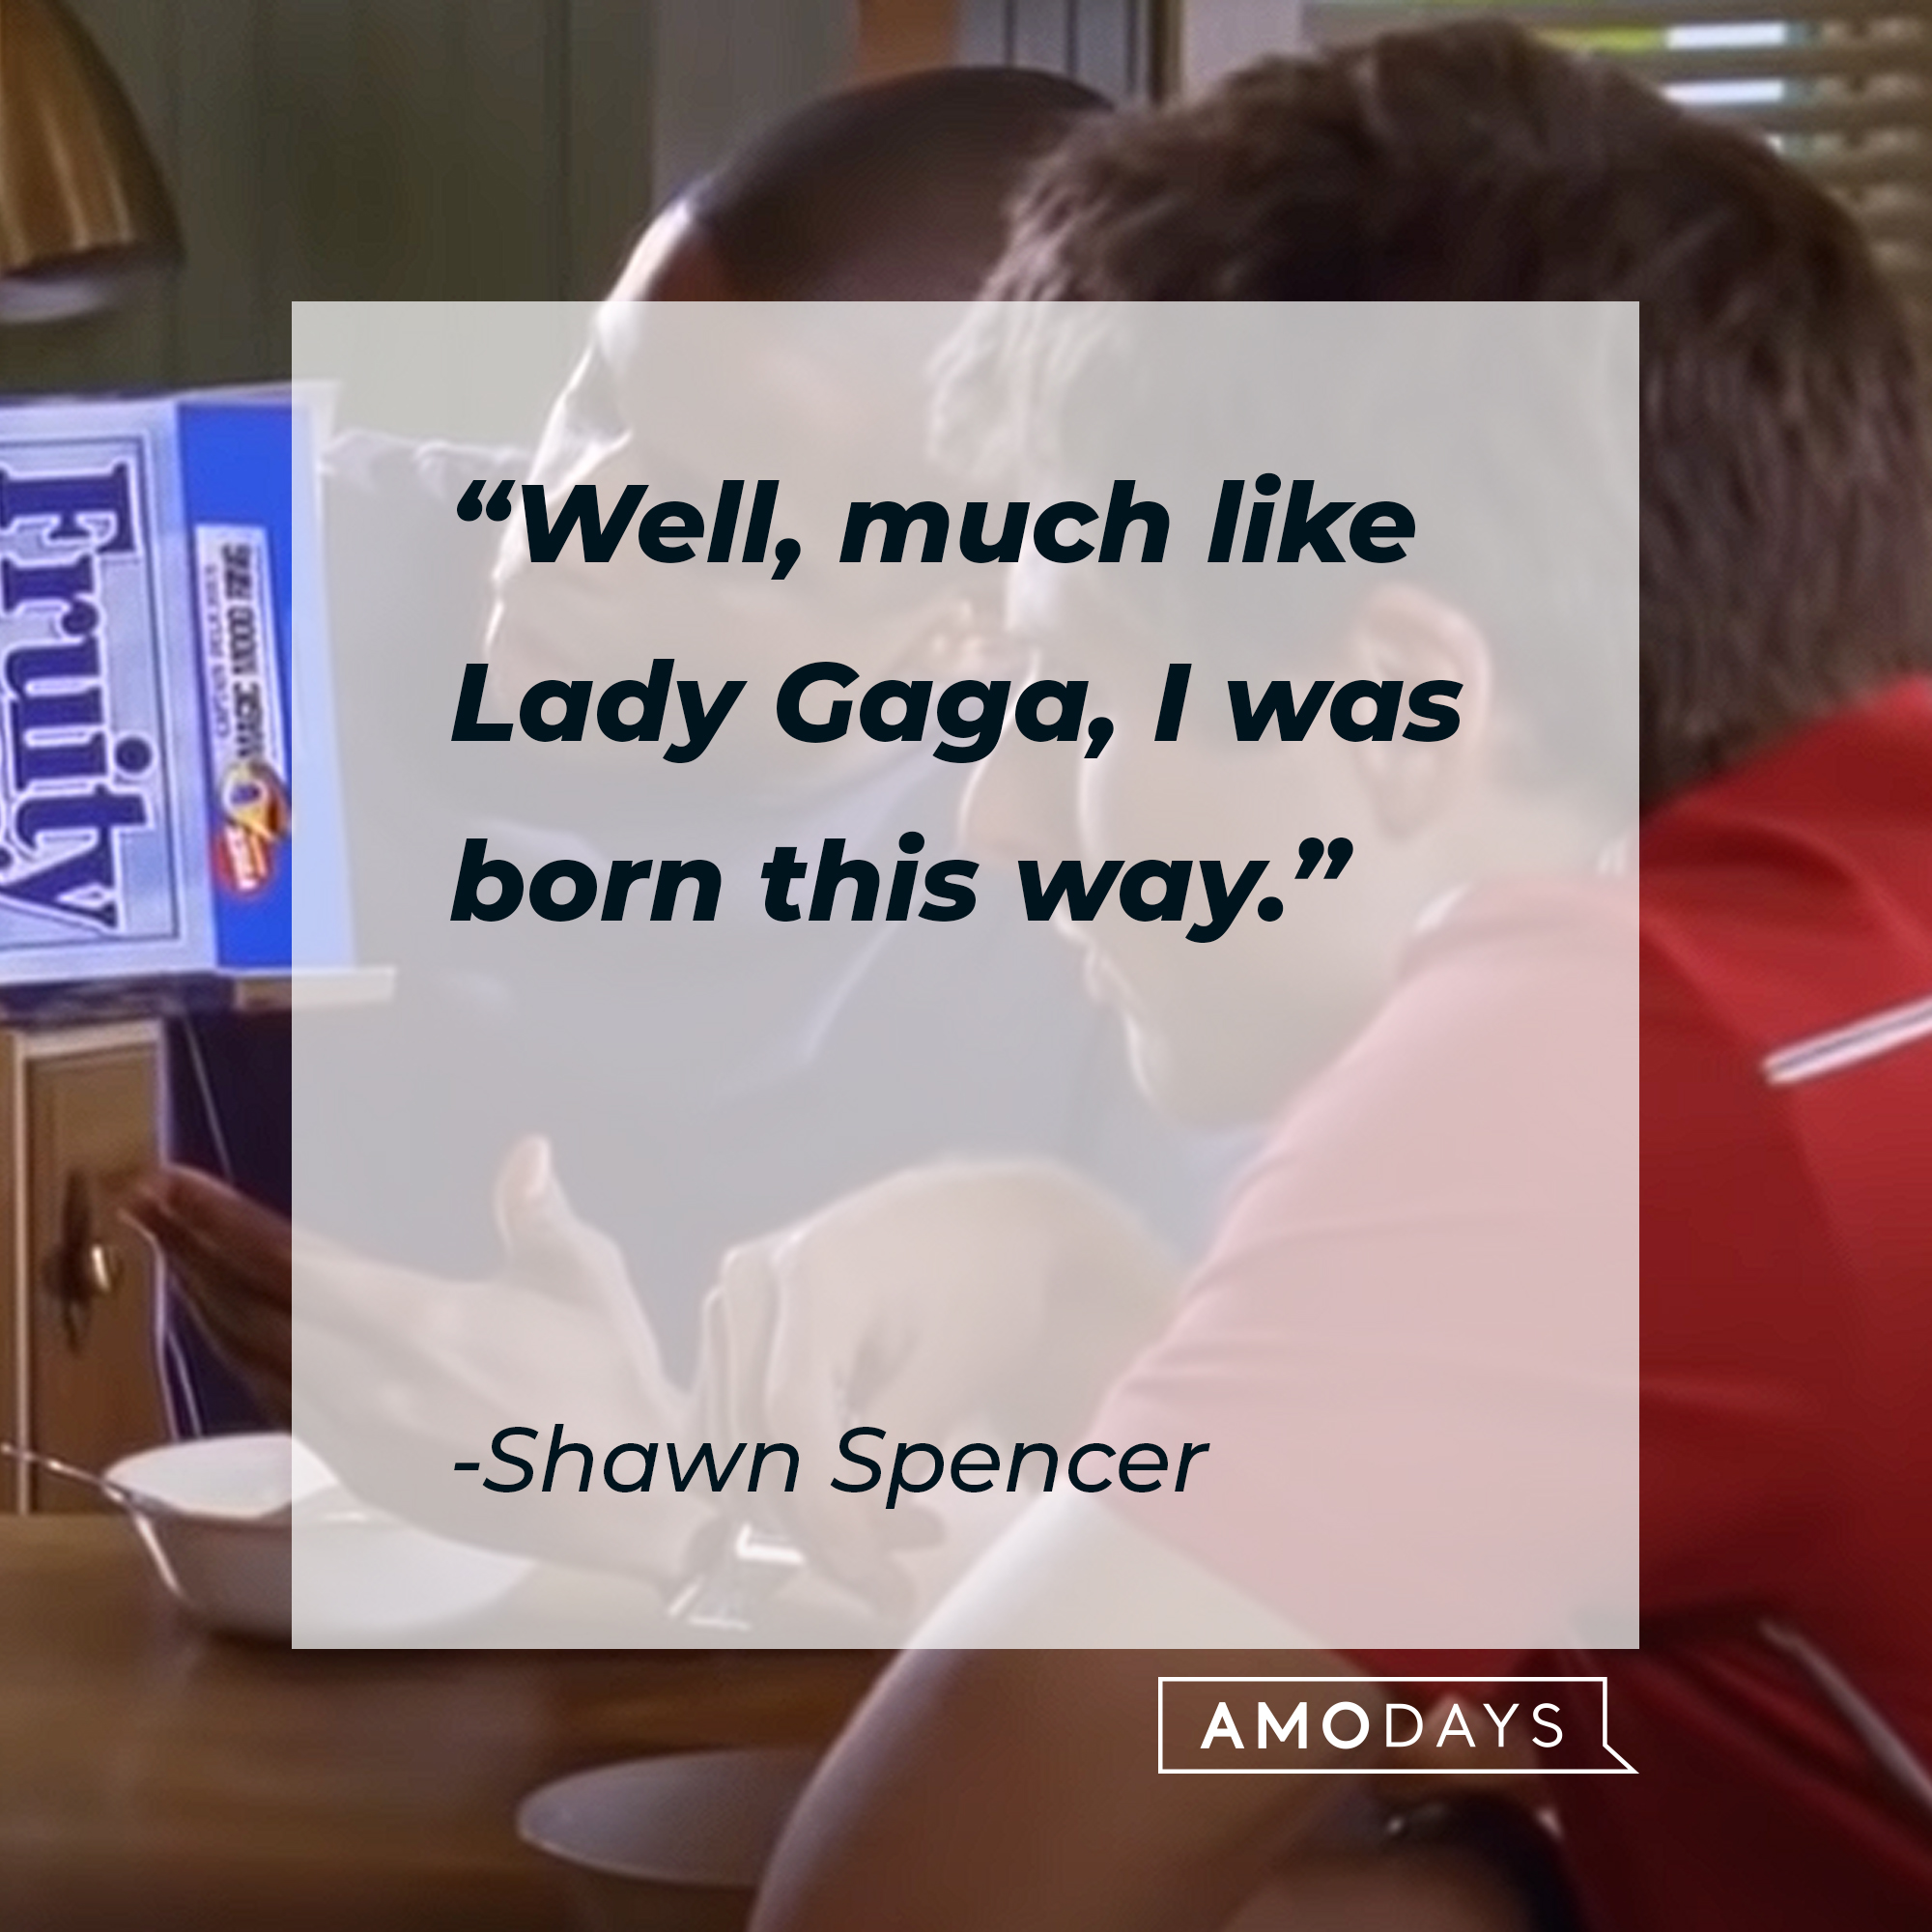 Shawn Spencer's quote: "Well, much like Lady Gaga, I was born this way." | Source: youtube.com/Psych